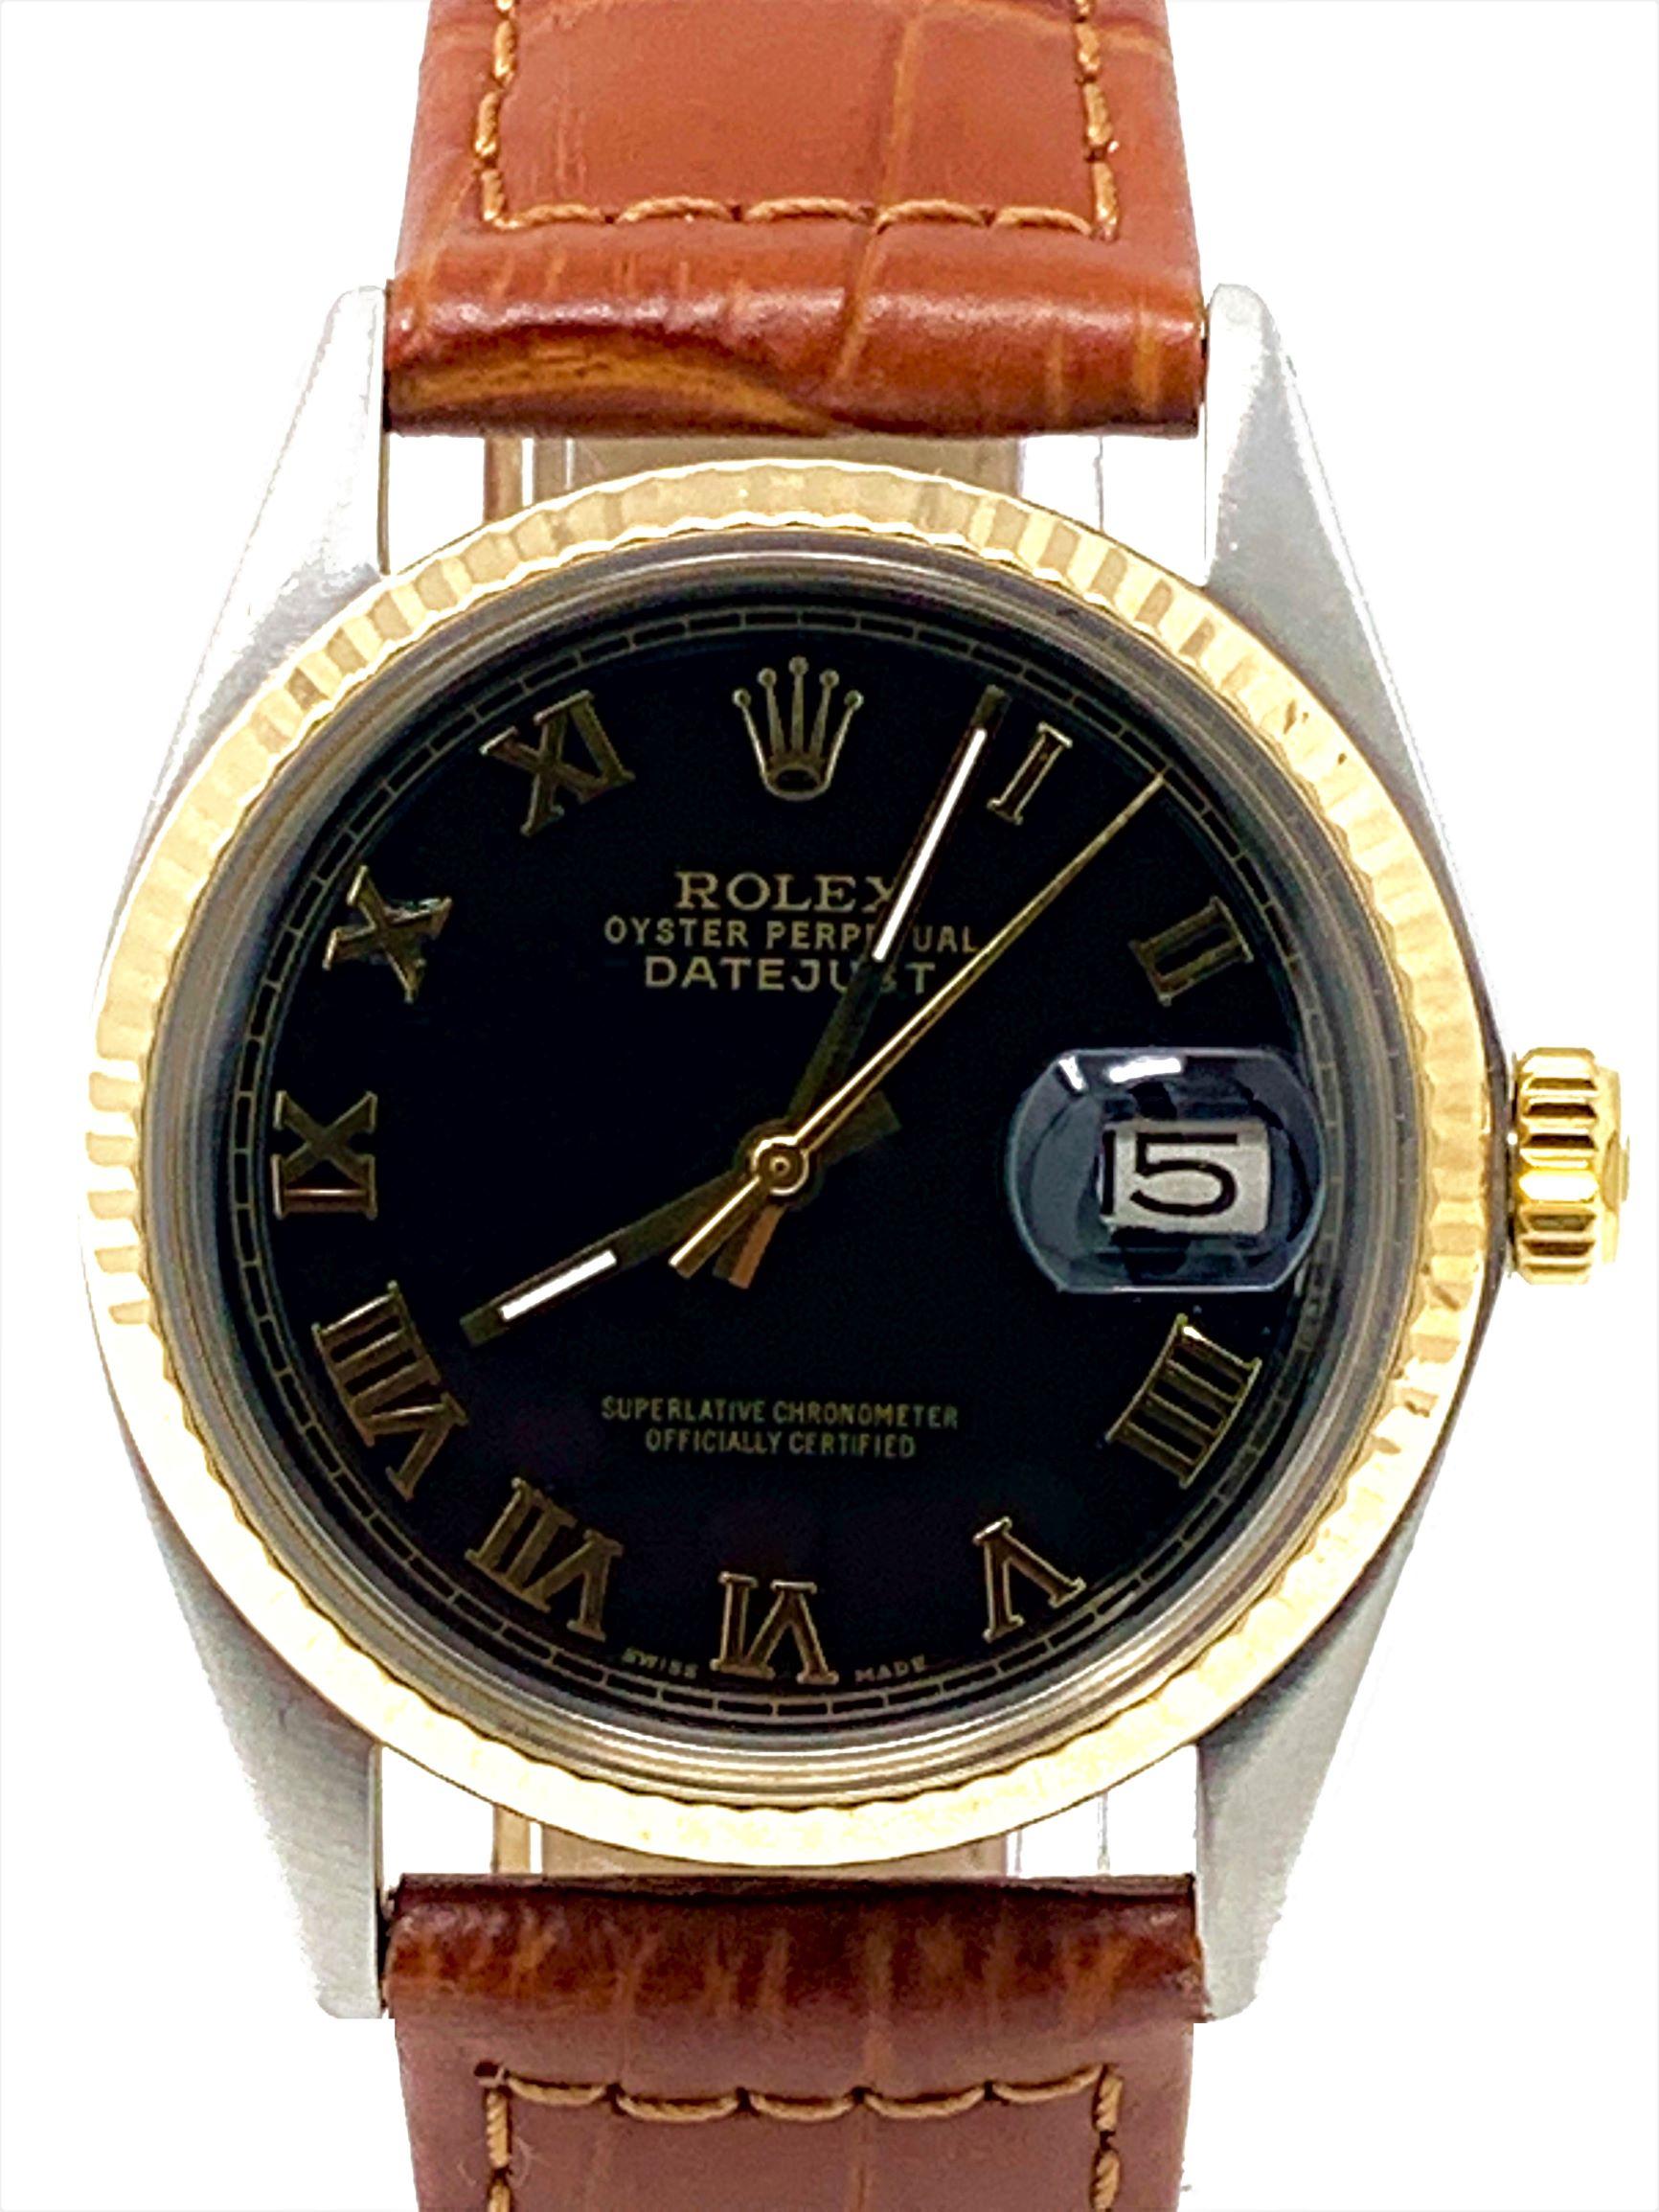 Brand - Rolex
Model - 1601 Datejust 
Case Size - 36mm
Metals - Steel/Yellow Gold
Dial - Two-tone Roman Numeral 
Bezel - Rolex gold Fluted 
Crystal - New Acrylic
Movement - Rolex Cal.1570 Automatic
Wrist Band - Generic Brown Leather 
Wrist Size - 8